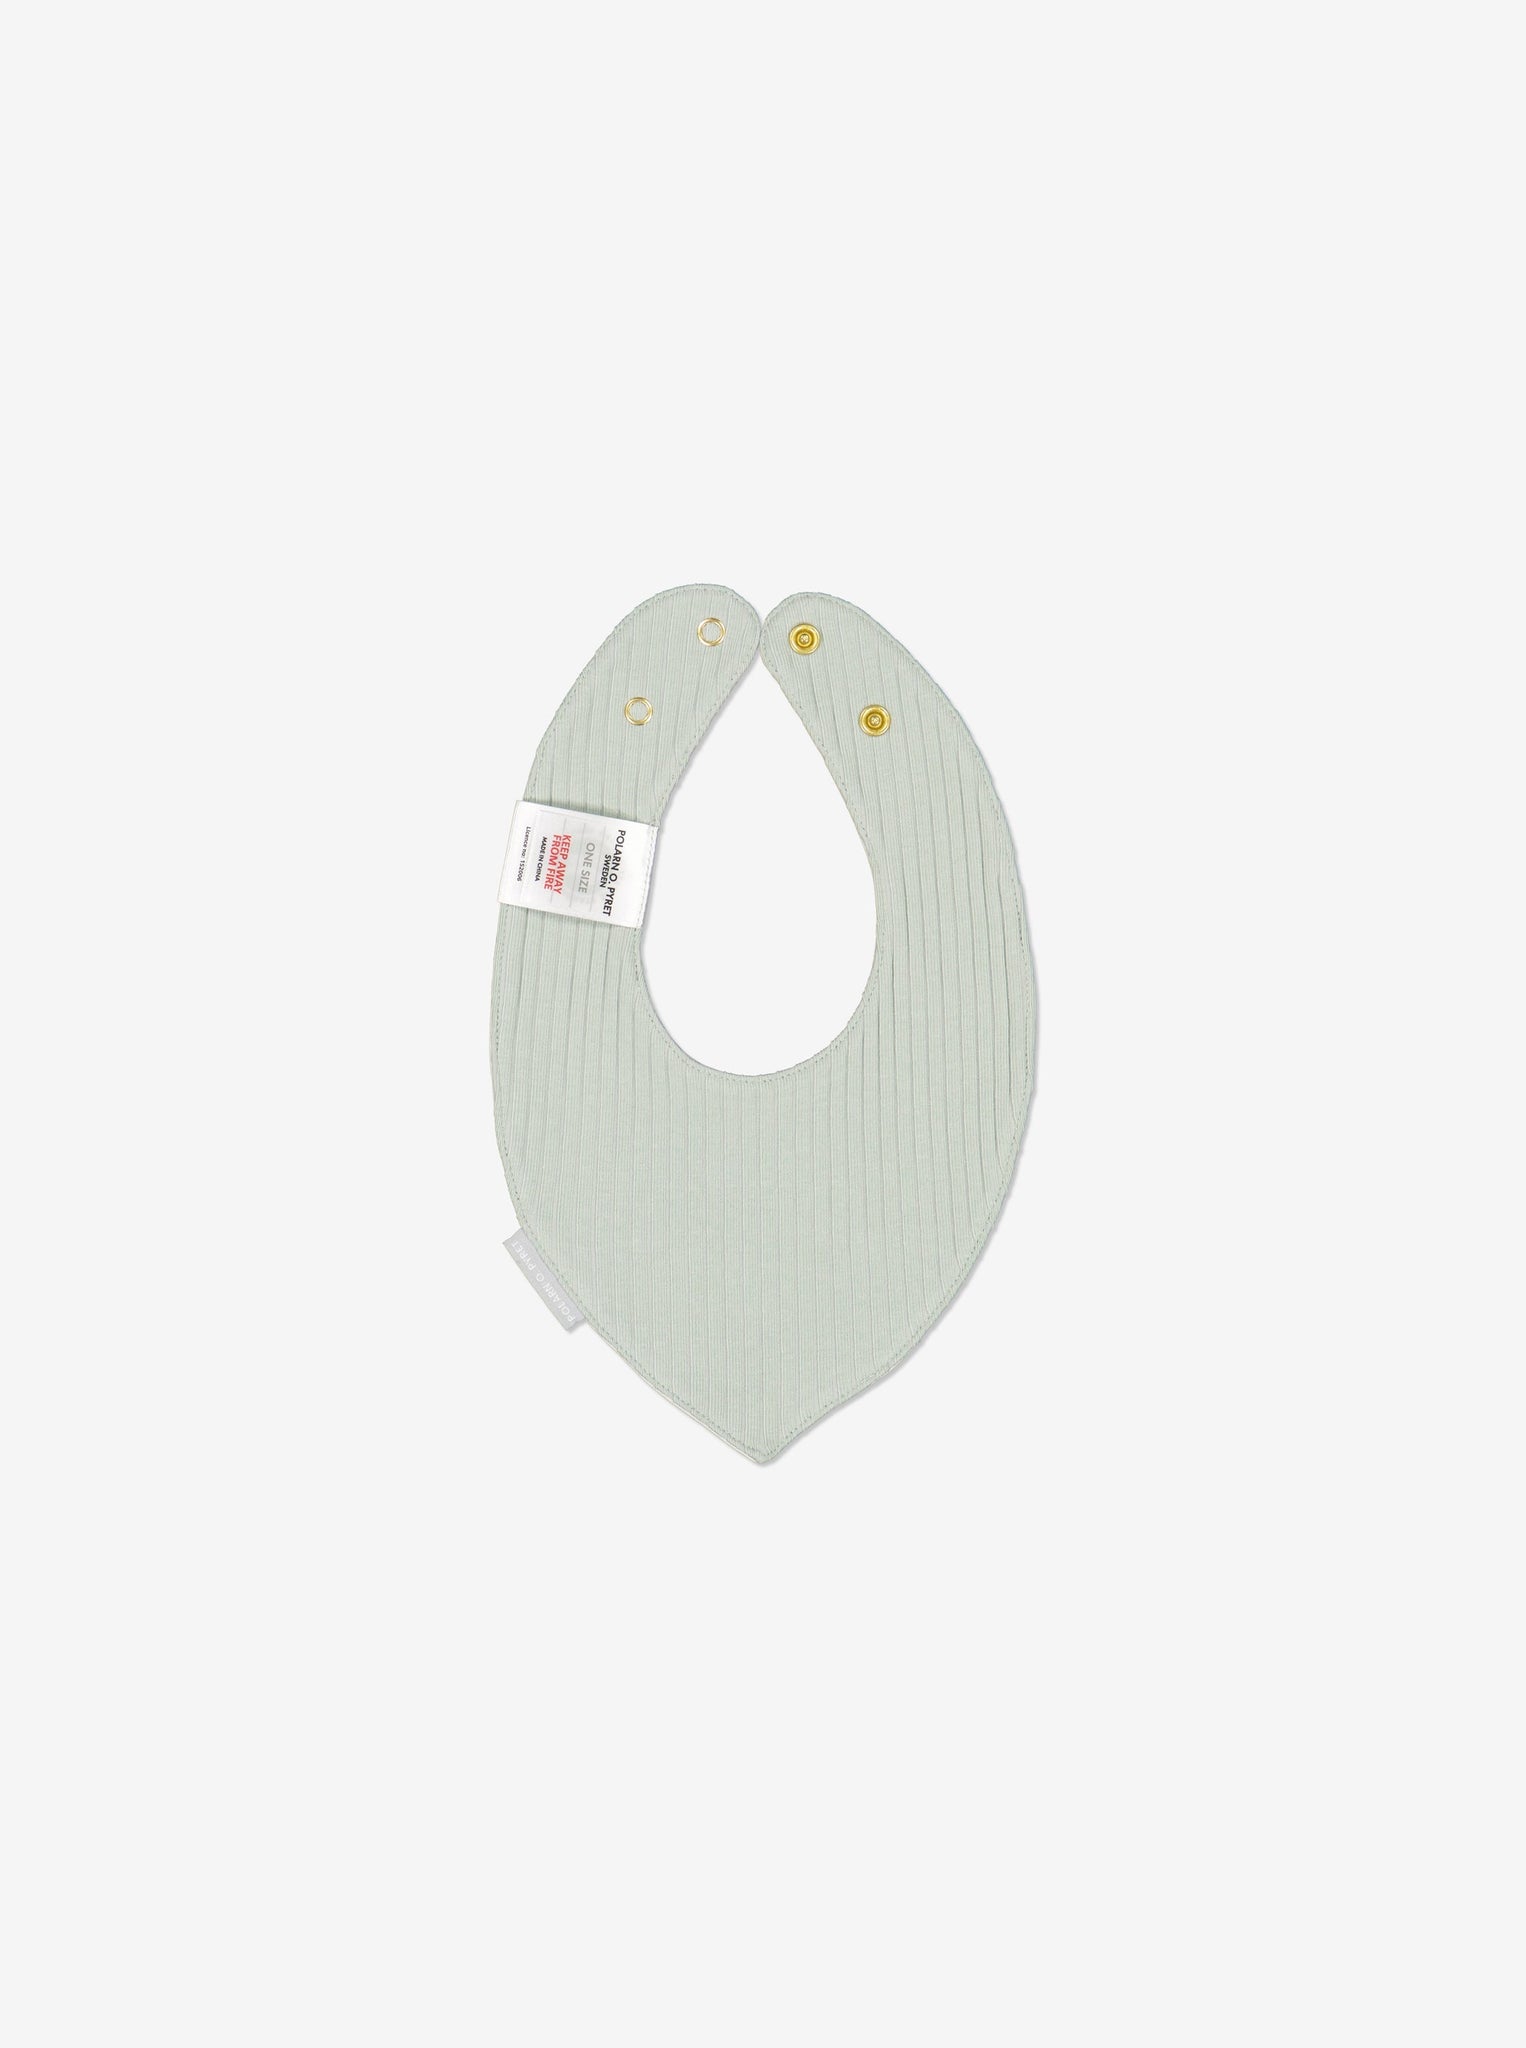  Mouse Newborn Baby Bib from Polarn O. Pyret Kidswear. Made using eco-friendly materials.